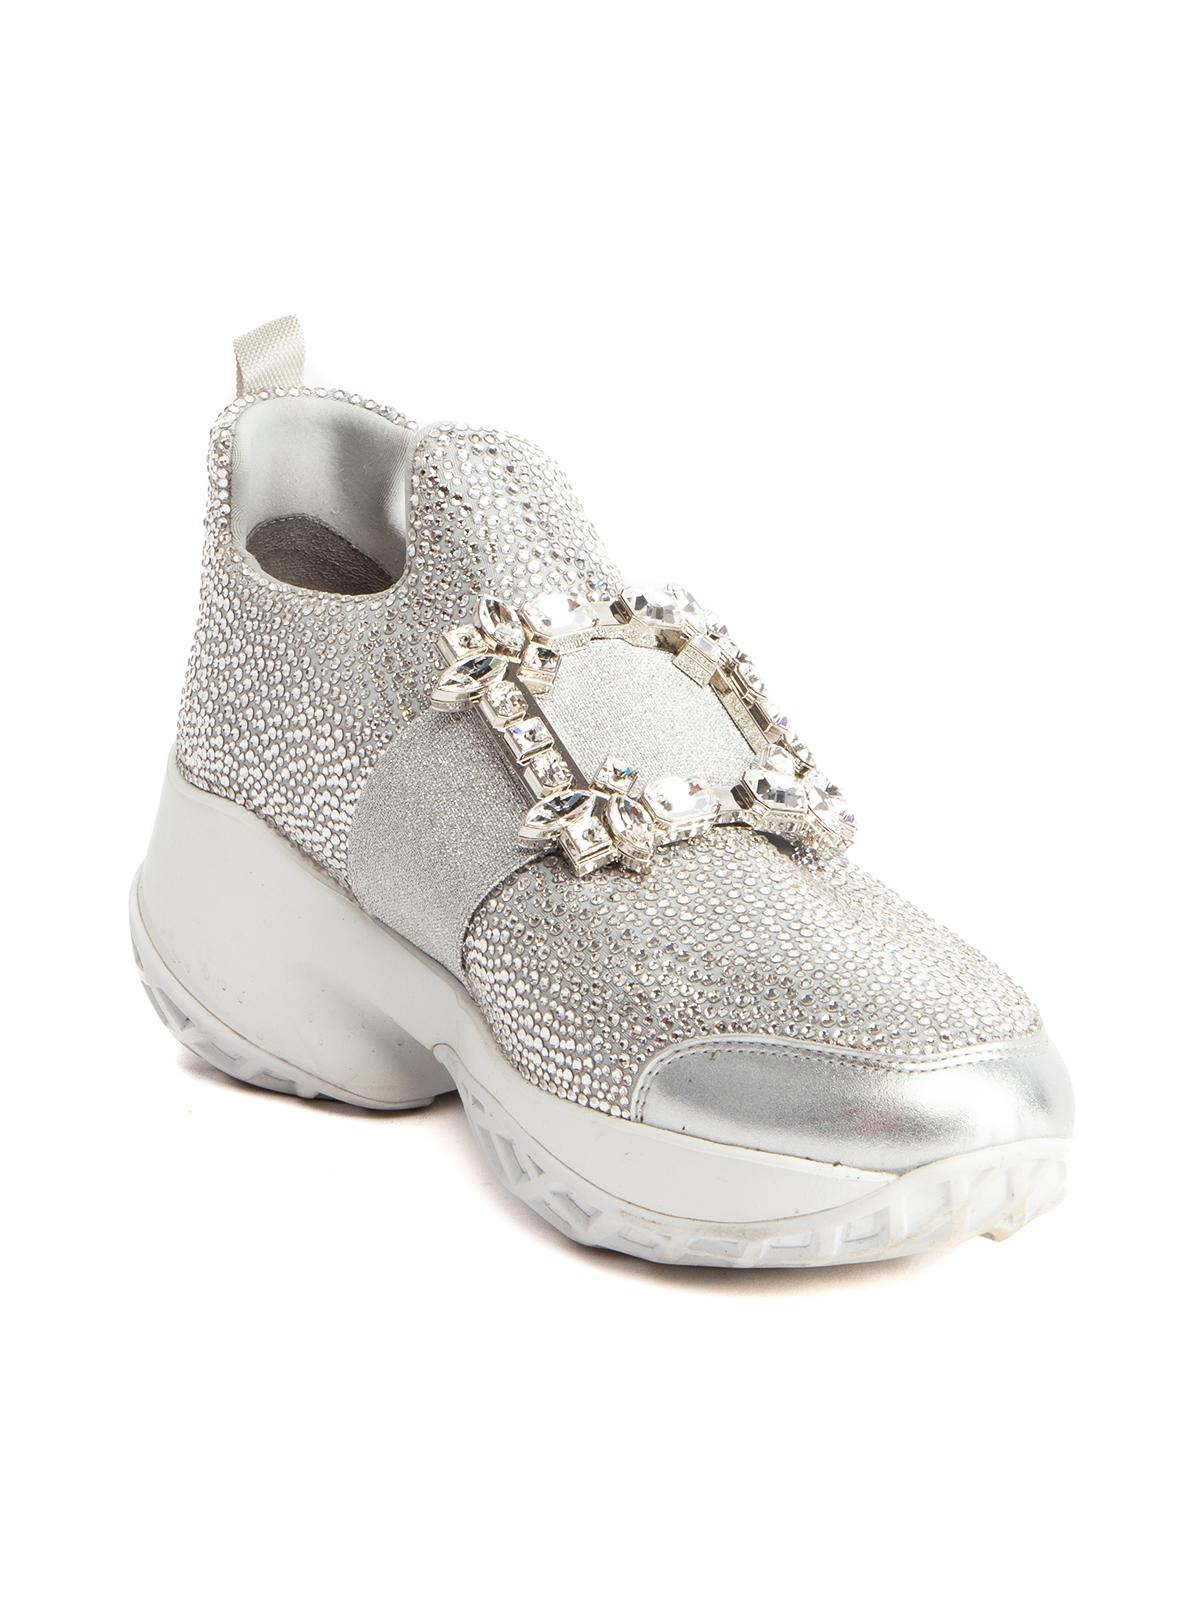 CONDITION is Very good. Minimal wear to sneakers is evident. Minimal wear to midsole and outsole on this used Roger Vivier designer resale item Details Silver Cloth Diamante crystal Square crystal embellished buckle Almond toe Slip on Chunky Comes